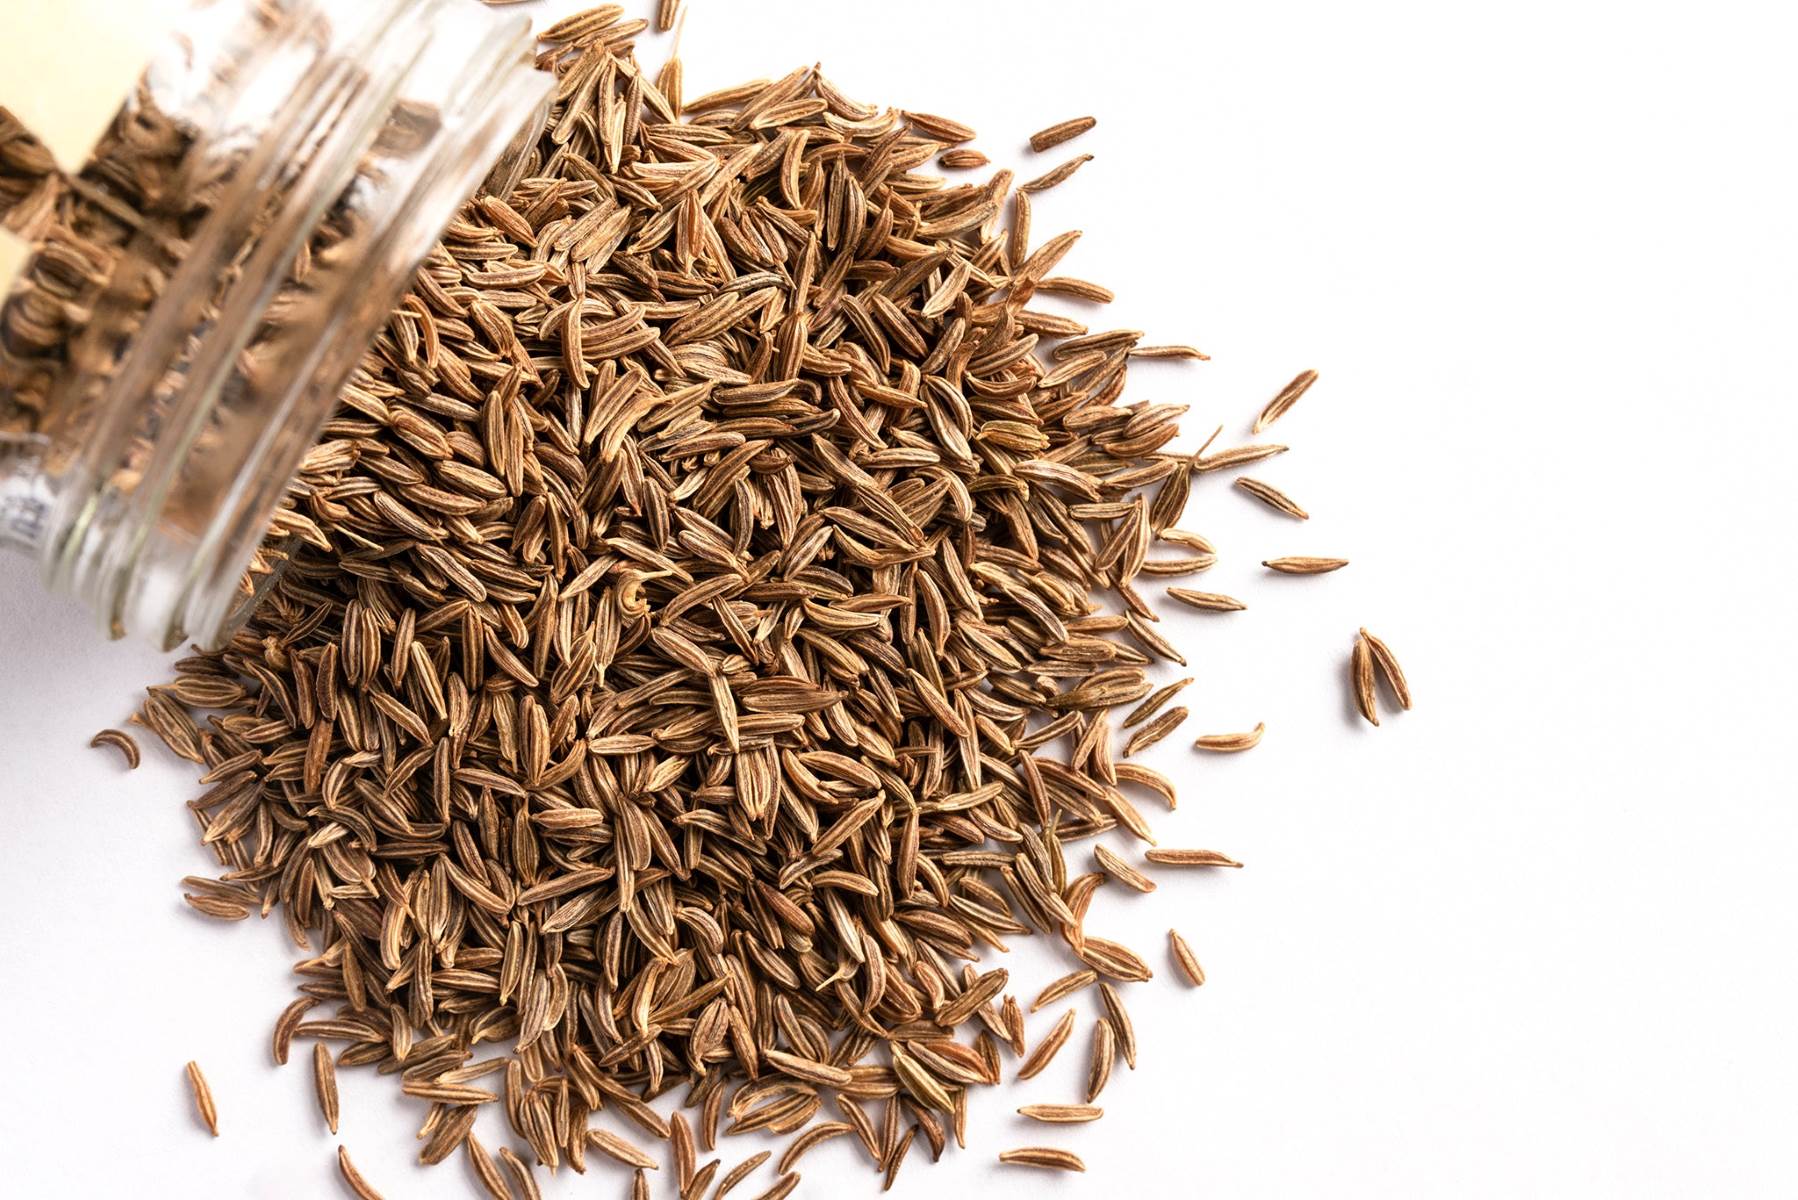 What Are Caraway Seeds